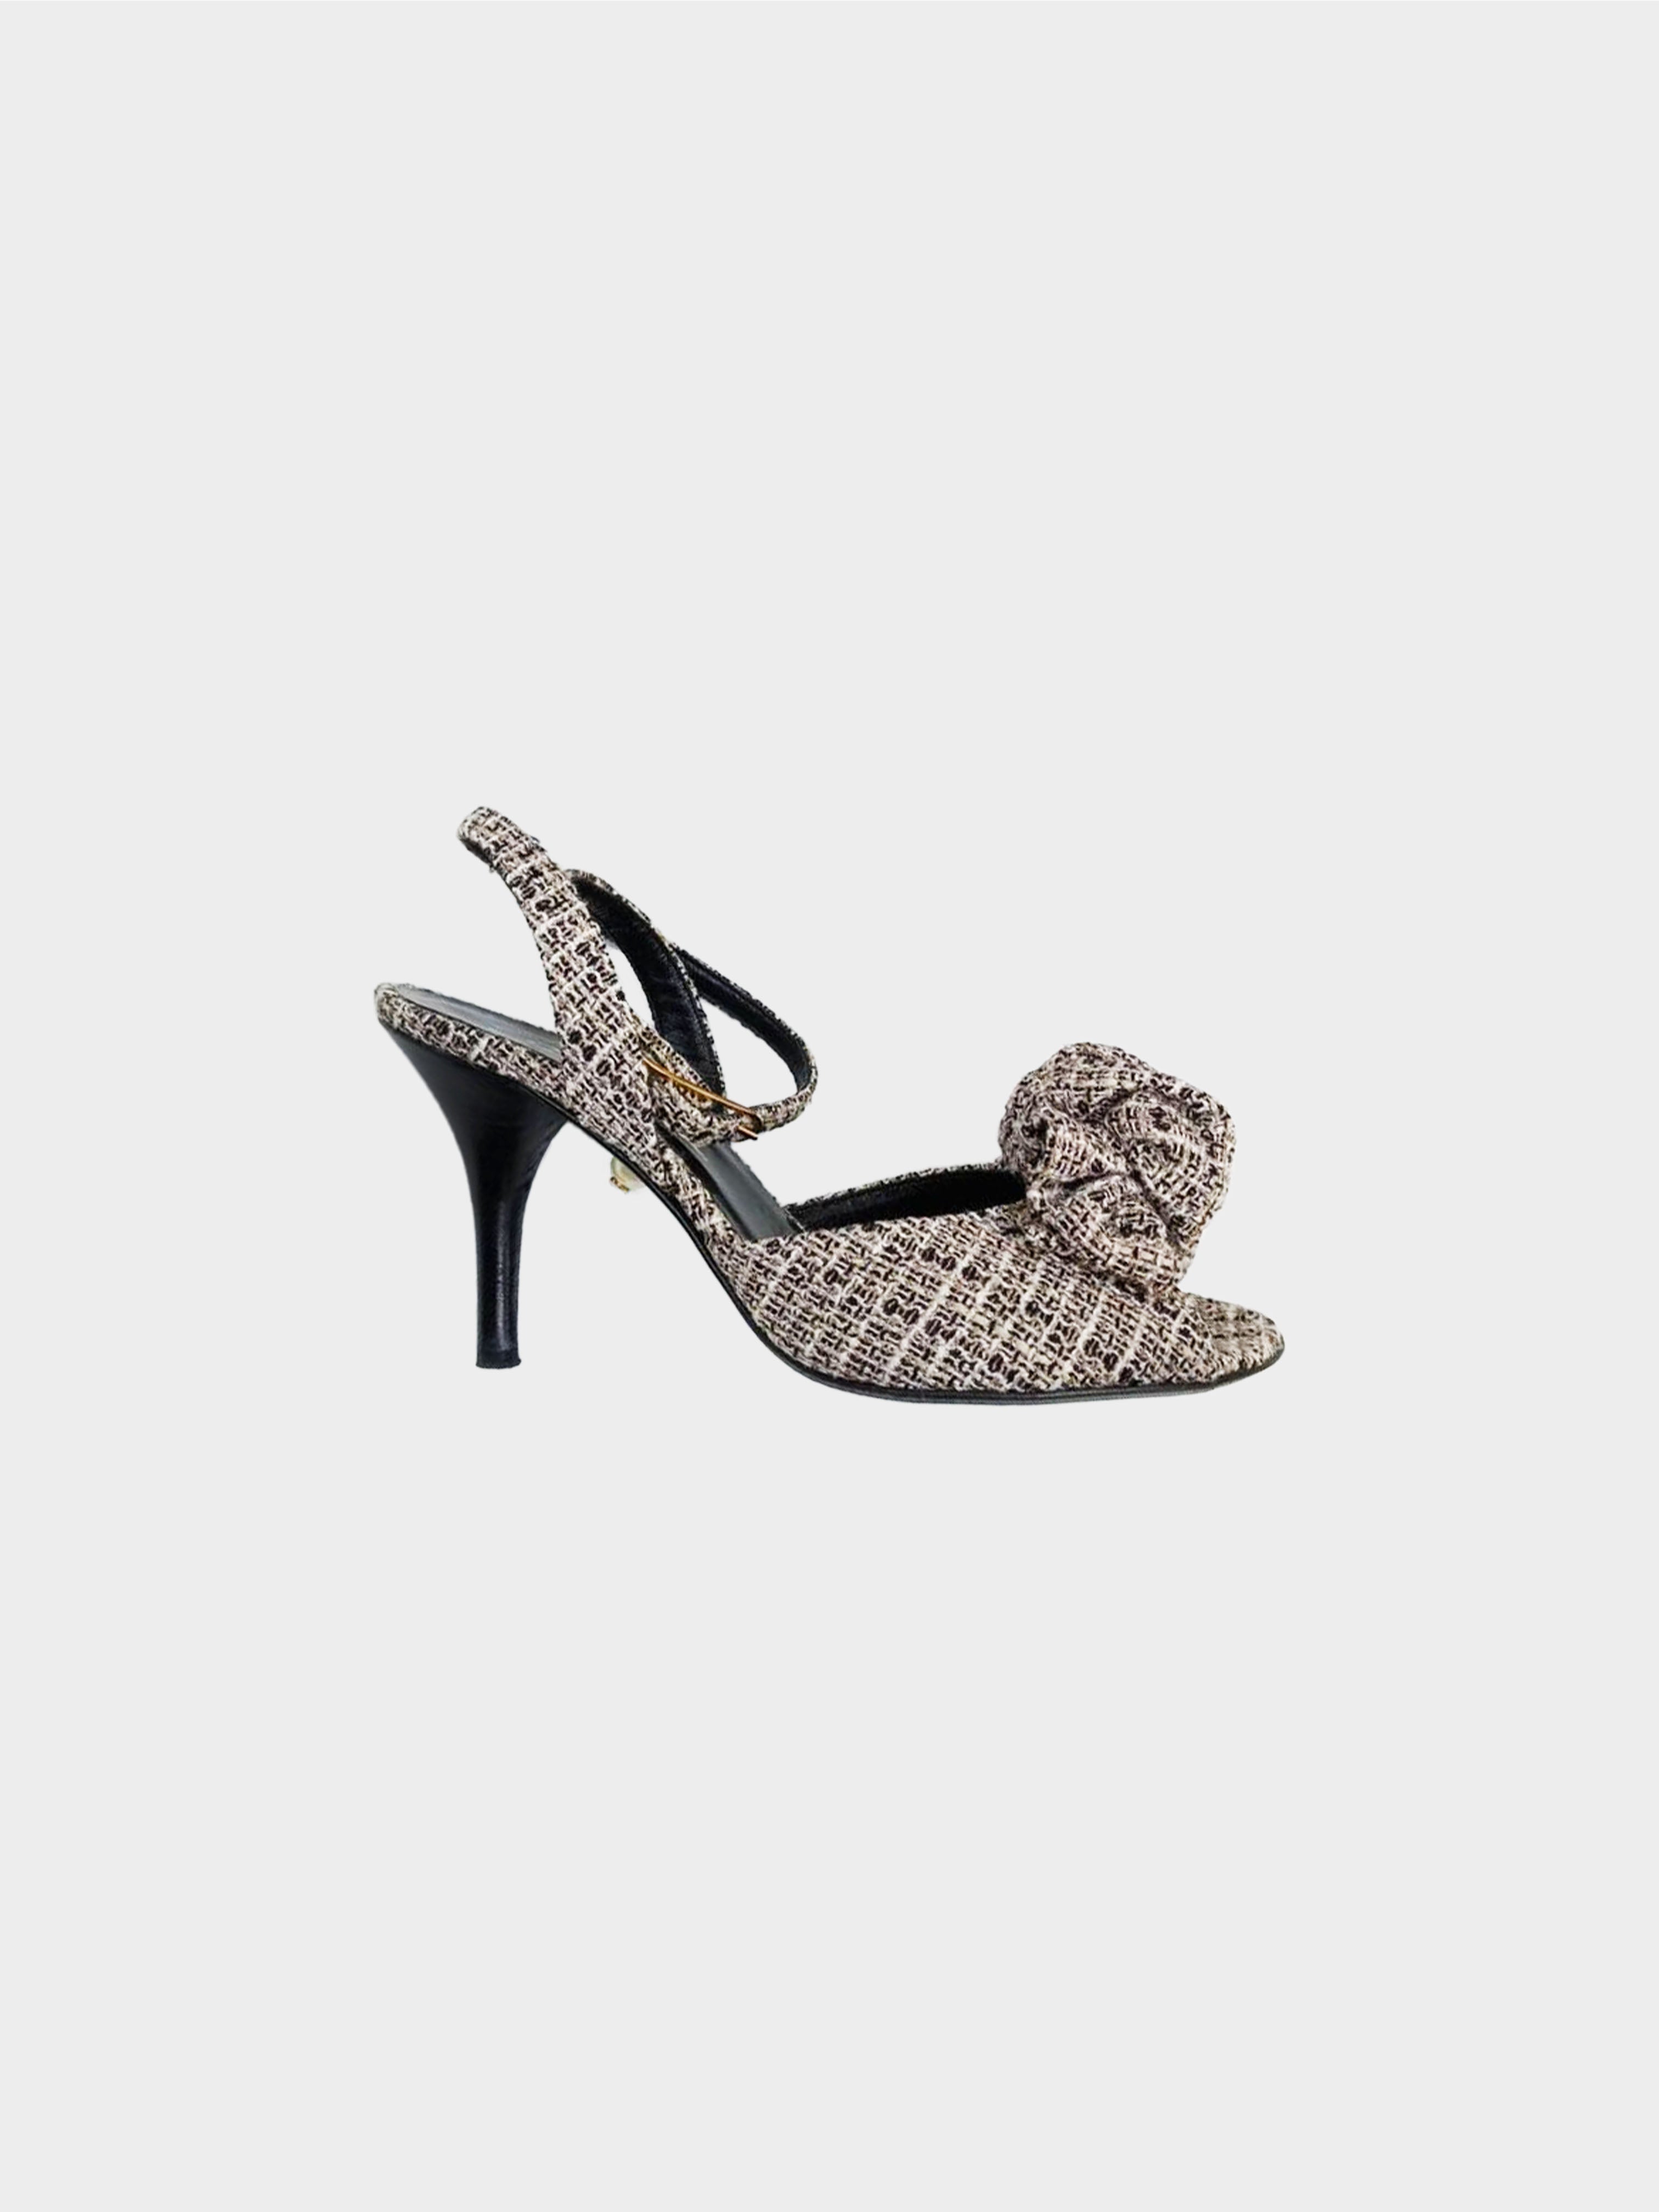 Chanel Spring 2003 Tweed Bow Ankle Strap Heeled Sandals